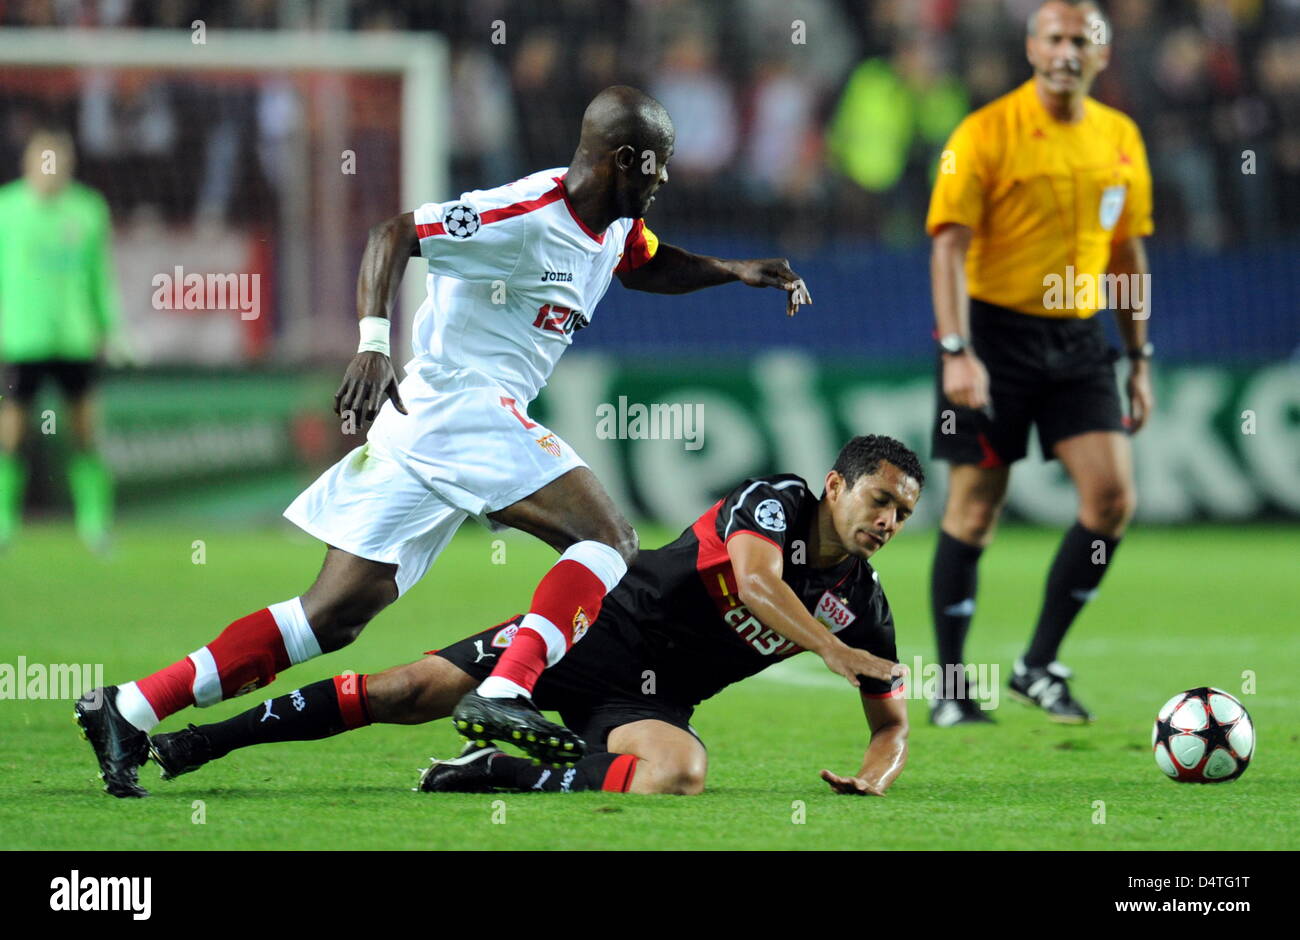 Stuttgart?s Elson (R) and Sevilla?s Didier Zokora vie for the ball during the Champions League match Sevilla vs VfB Stuttgart at Ramon Sanchez Pizjuan Stadium in Sevilla, Spain, 04 November 2009. The match ended in a 1-1 tie. Photo: Bernd Weissbrod Stock Photo